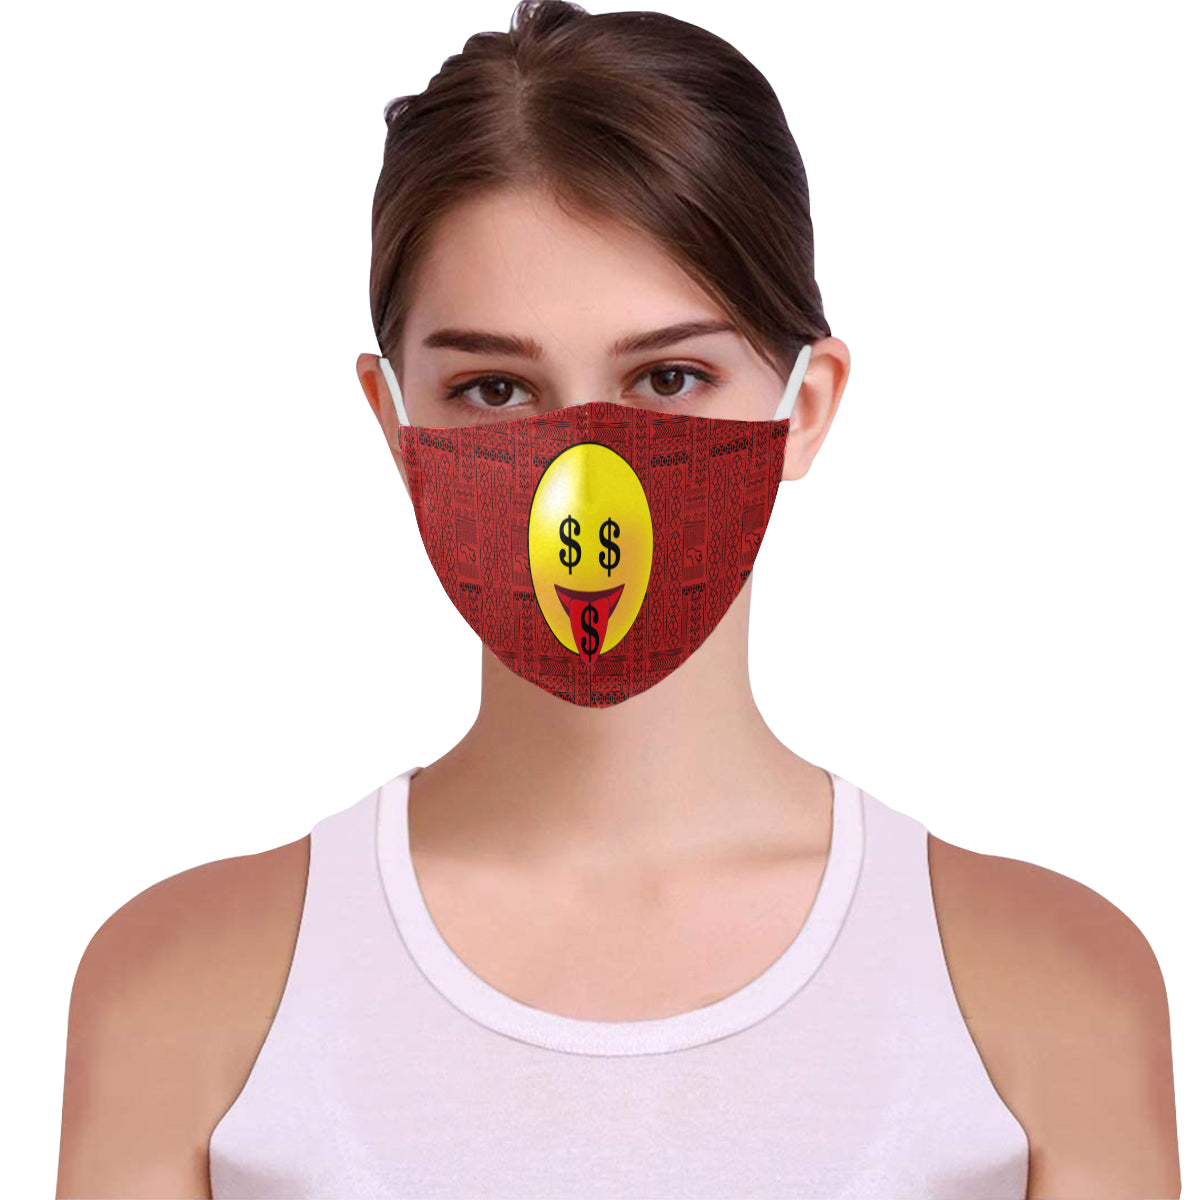 Like a Bawse! Tribal Print Emoji Cotton Fabric Face Mask with Filter Slot & Adjustable Strap - Non-medical use (2 Filters Included)